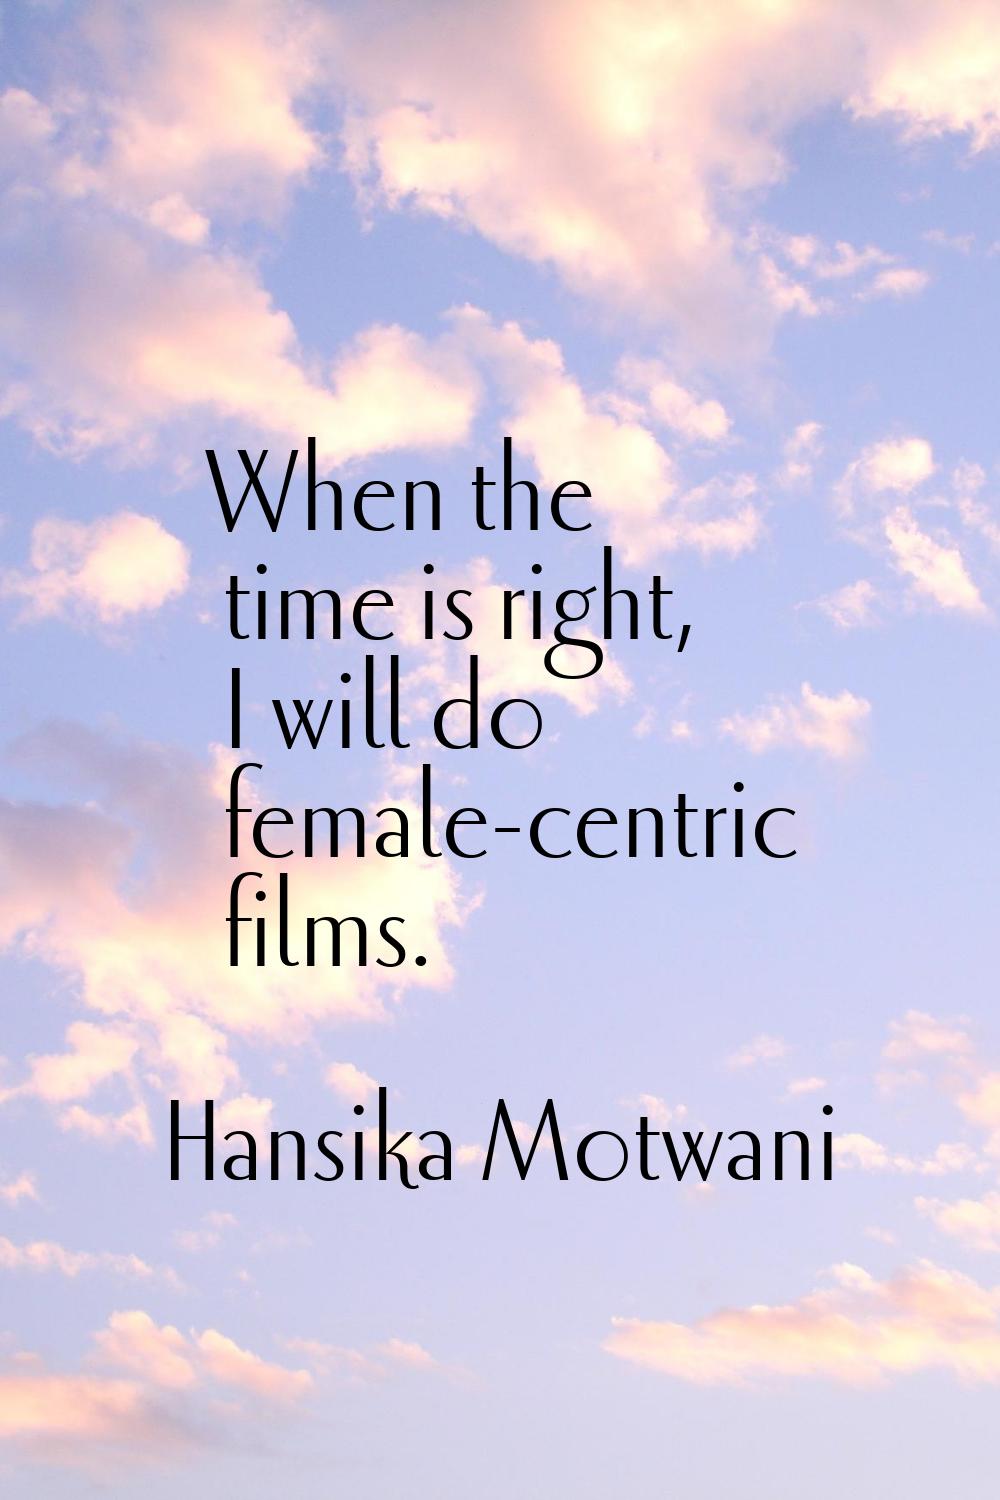 When the time is right, I will do female-centric films.